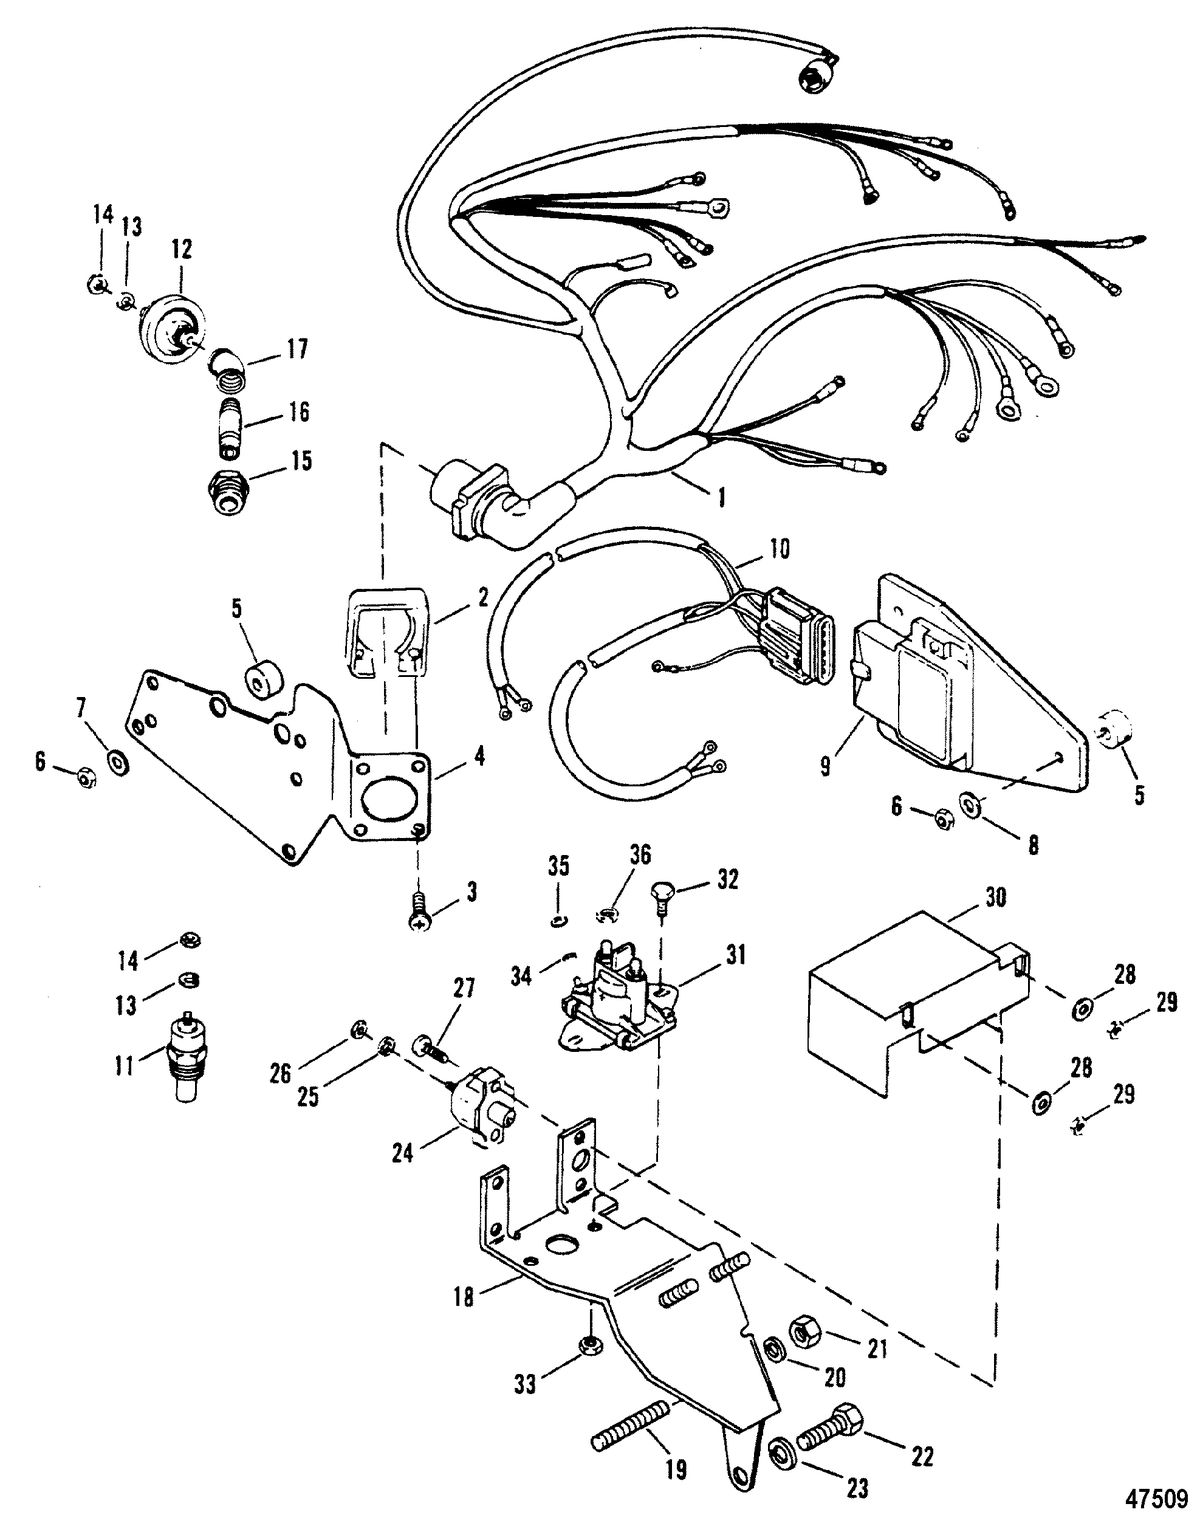 MERCRUISER 502 MAGNUM BRAVO ENGINE (GEN V) WIRING HARNESS AND ELECTRICAL COMPONENTS(EXHAUST BELOW)